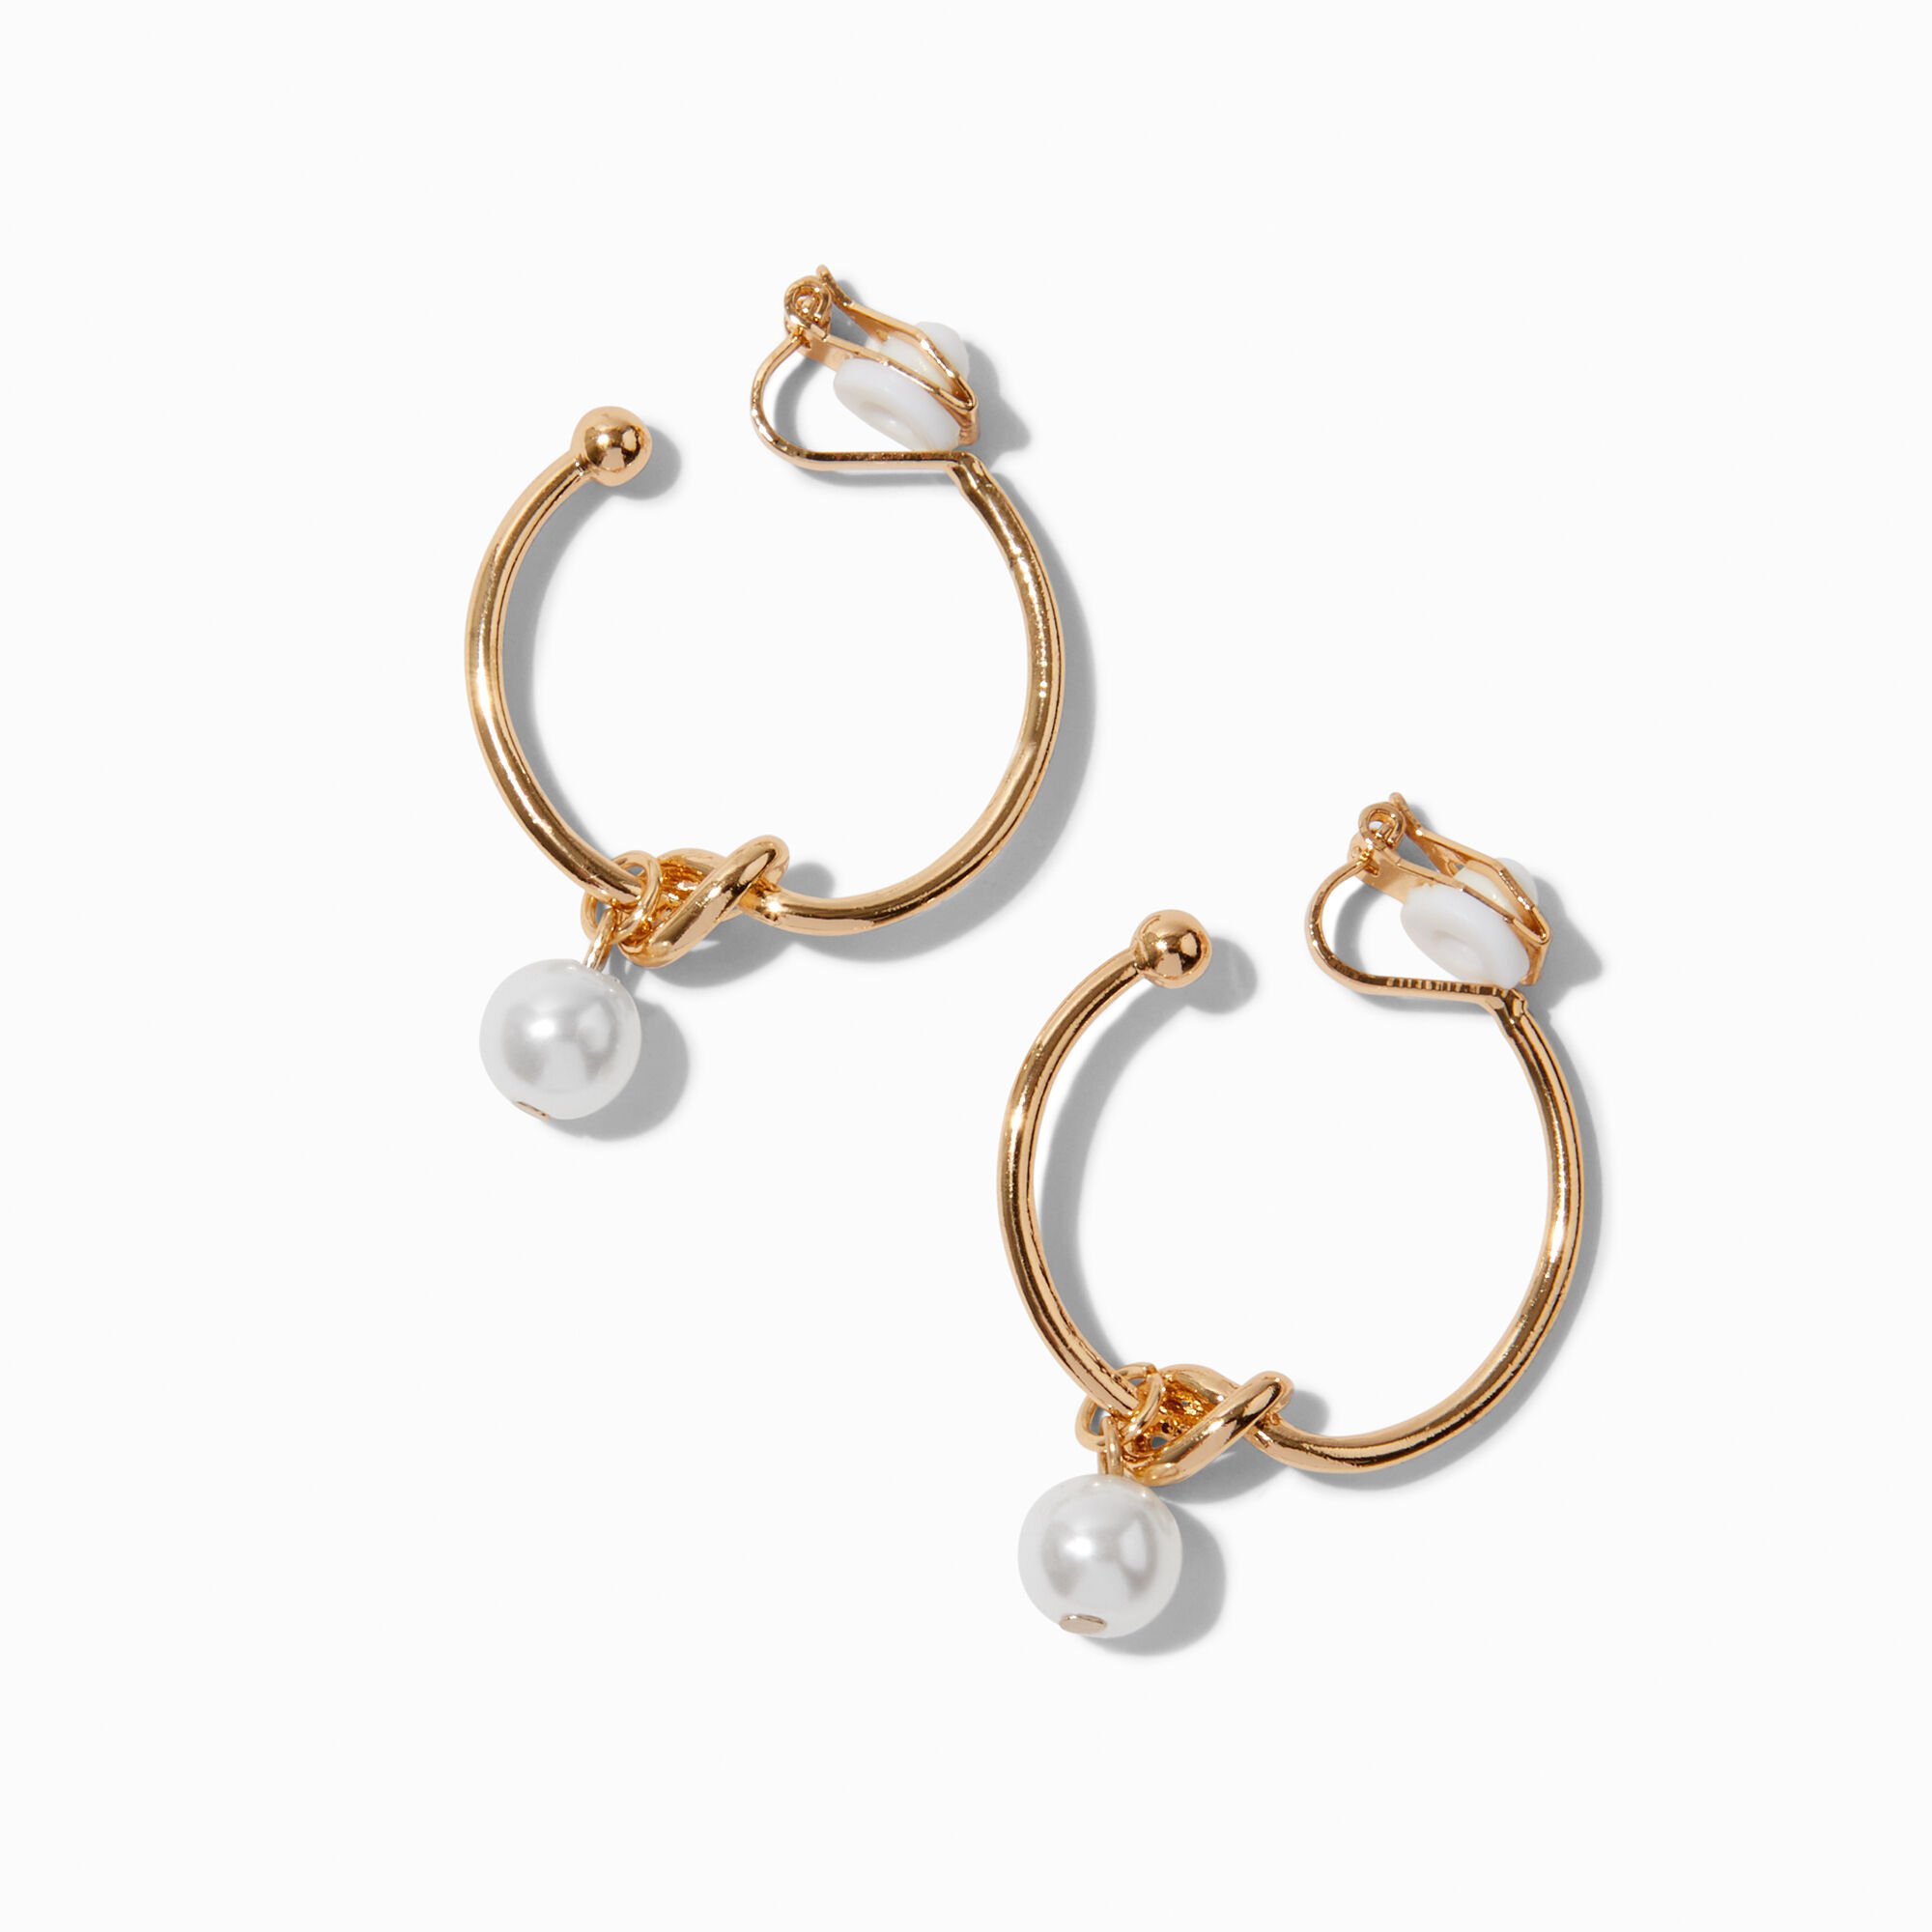 View Claires Tone Knotted Faux Pearl 25MM ClipOn Hoop Earrings Gold information